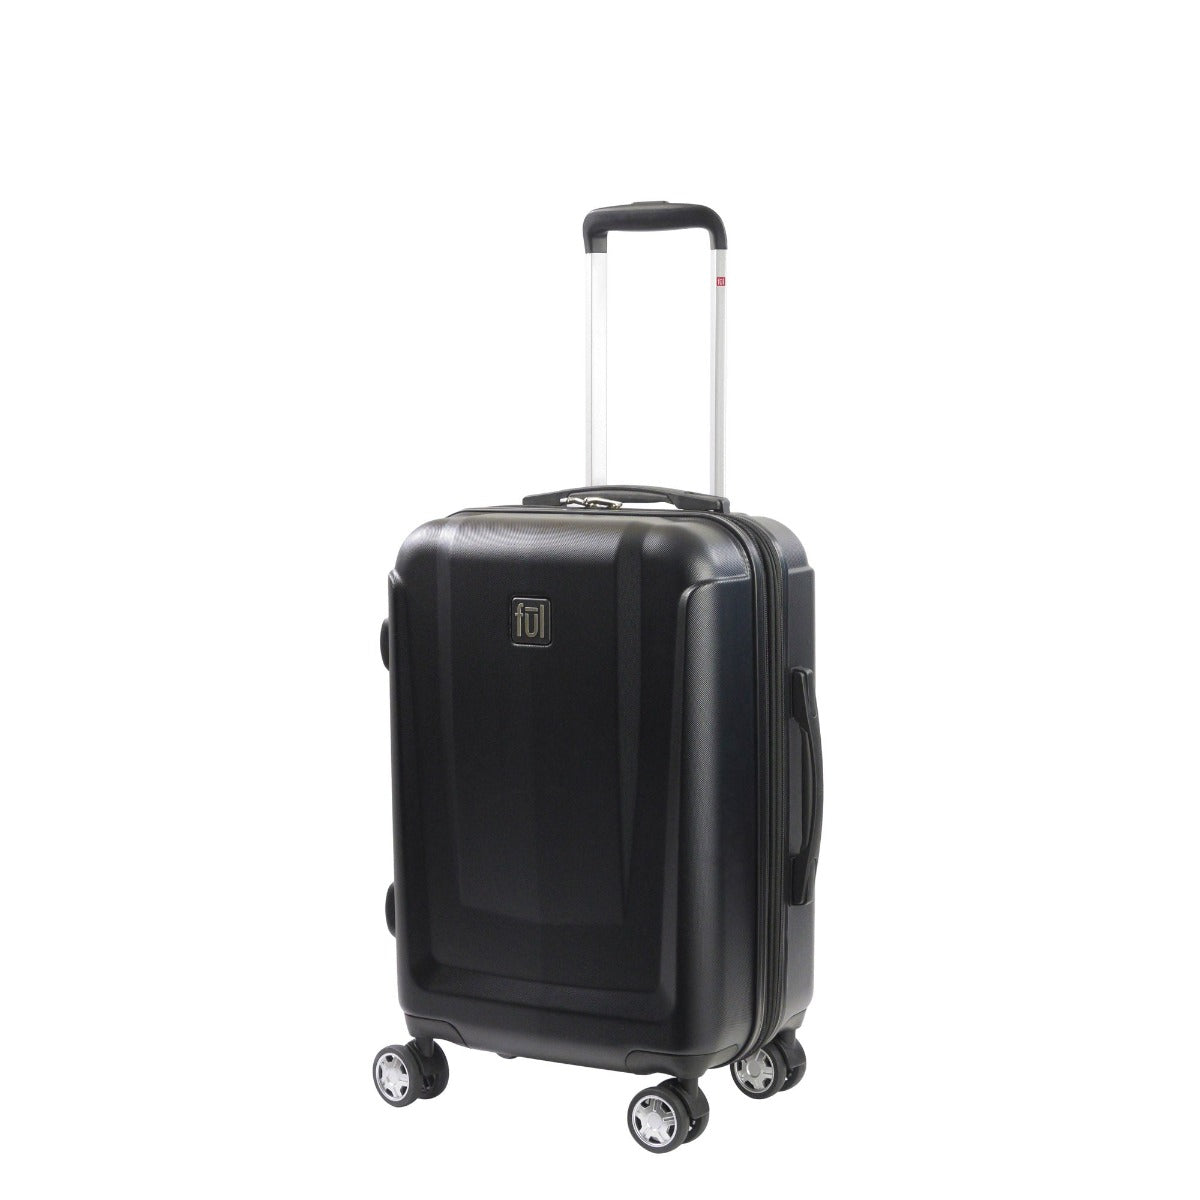 Ful Load Rider 21" spinner wheels rolling suitcase carry on hard sided luggage black